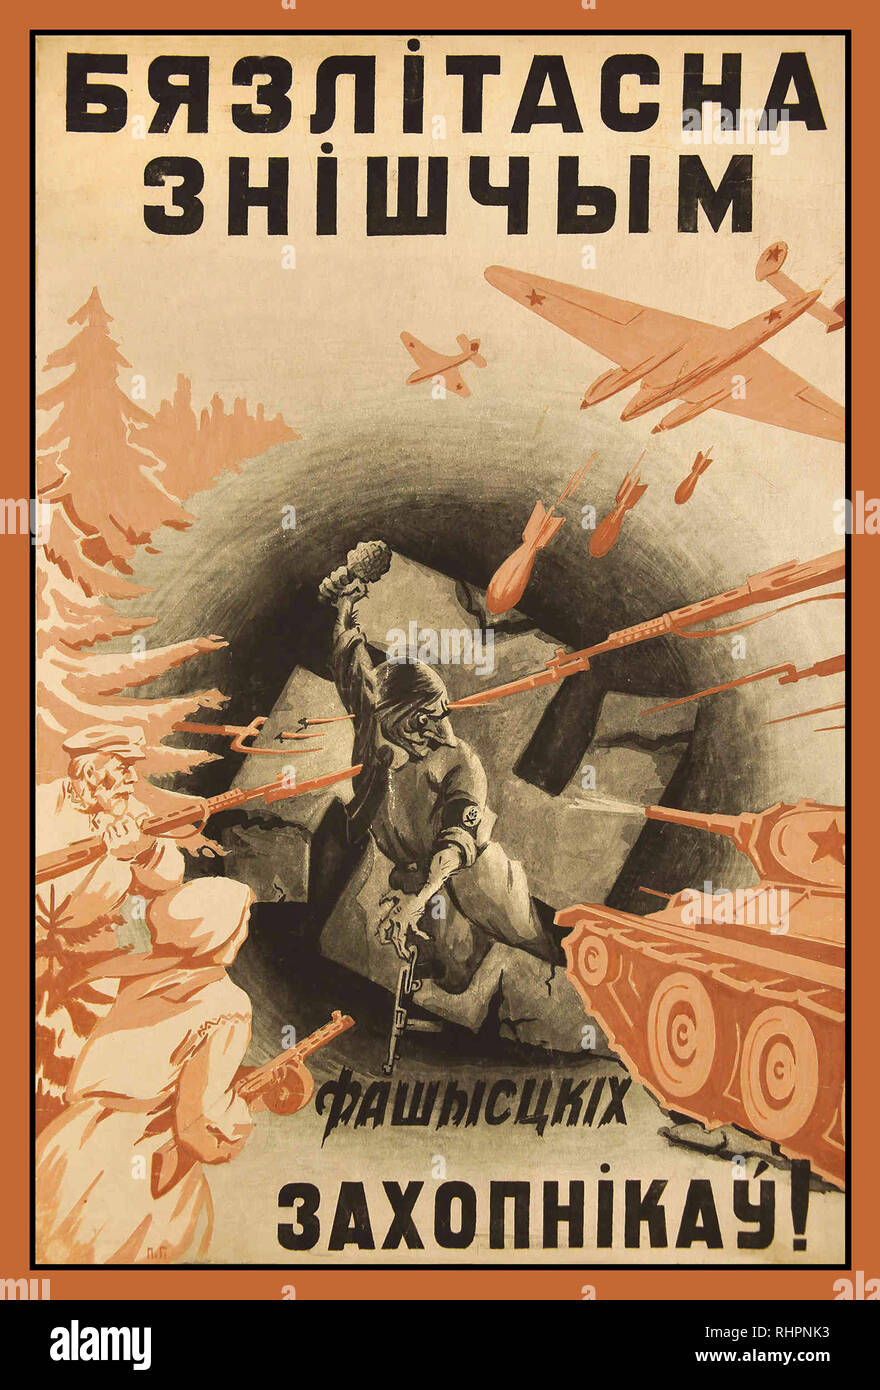 BARBAROSSA WW2 1940's Propaganda Soviet Russia Russian USSR Poster Belarus: “Mercilessly destroy the invaders”. Poster illustrating Soviet peoples airforce and army USSR Belarus attacking Nazi Germany invaders on the Eastern Front ‘Operation Barbarossa’ Stock Photo